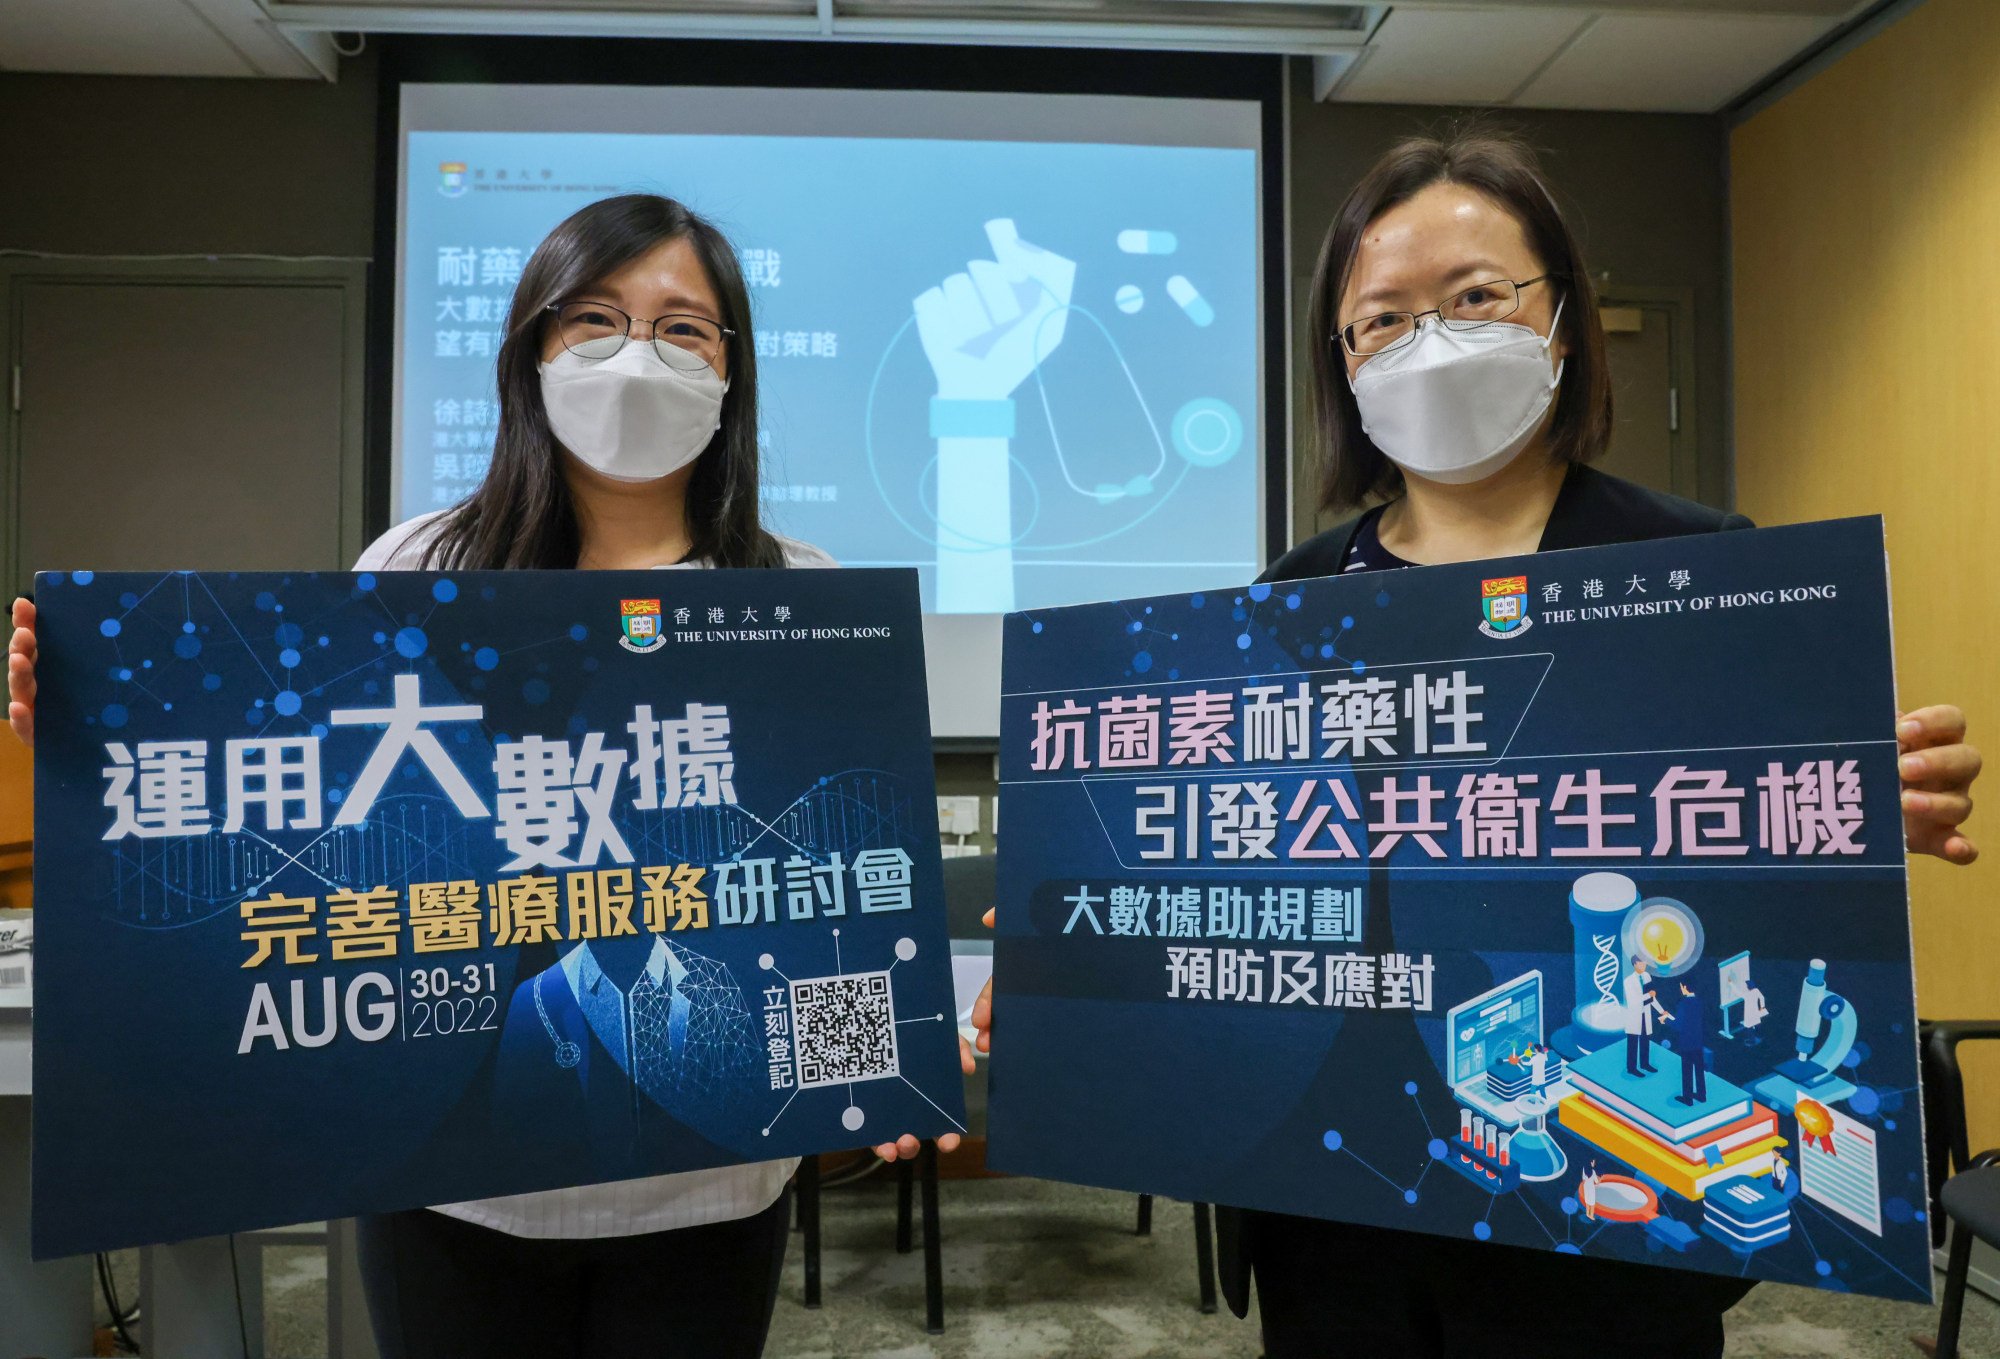 Dr Celine Chui and Dr Wu Peng from the University of Hong Kong warn of the dangers of a superbug found in the city’s hospitals. Photo: Nora Tam